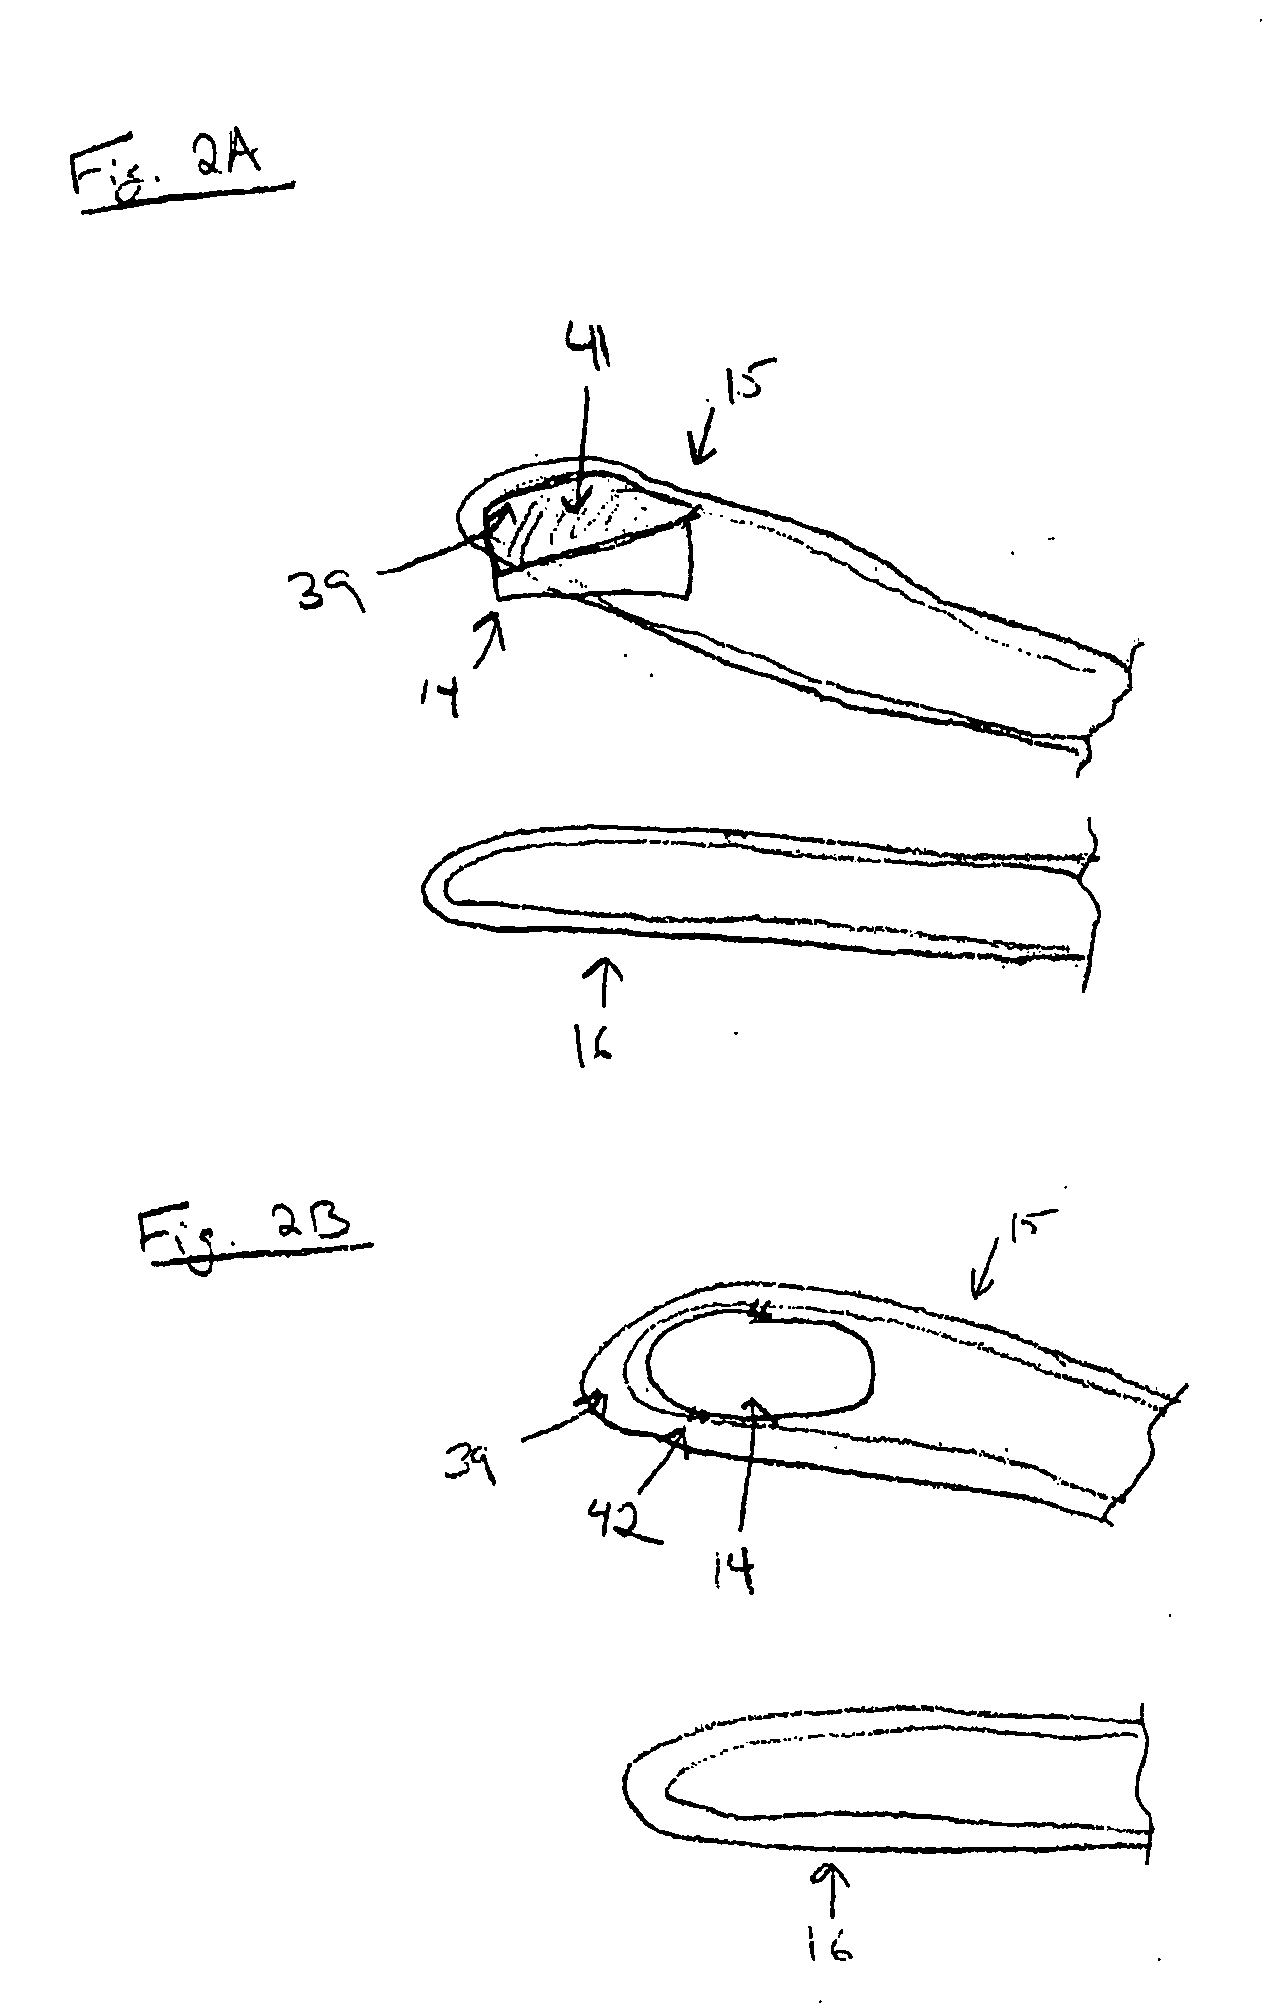 Medical device and system for providing an image